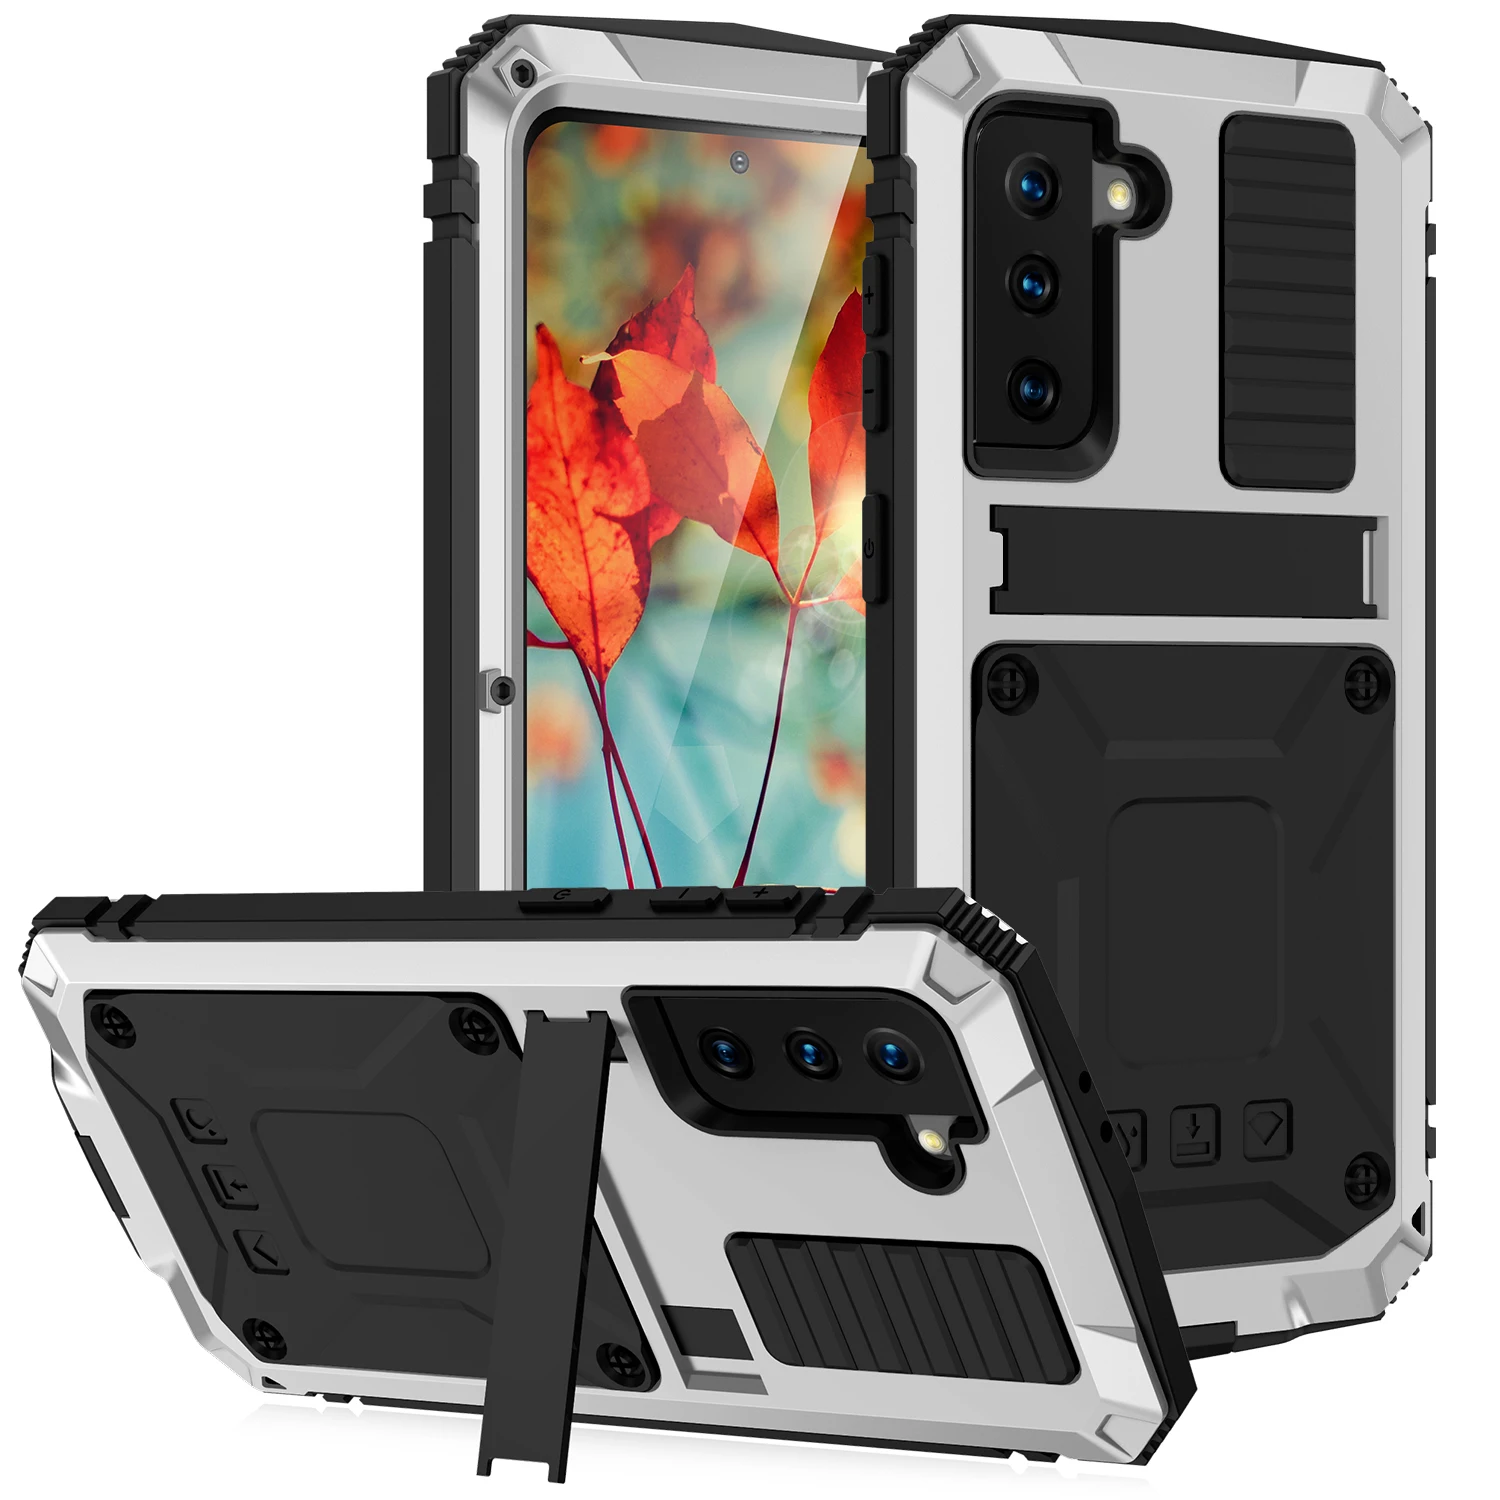 

New Protect Rugged Armor Kickstand Metal Case For Samsung Galaxy S21 S20 Plus A32 5G Aluminum Silicone Shockproof Cover